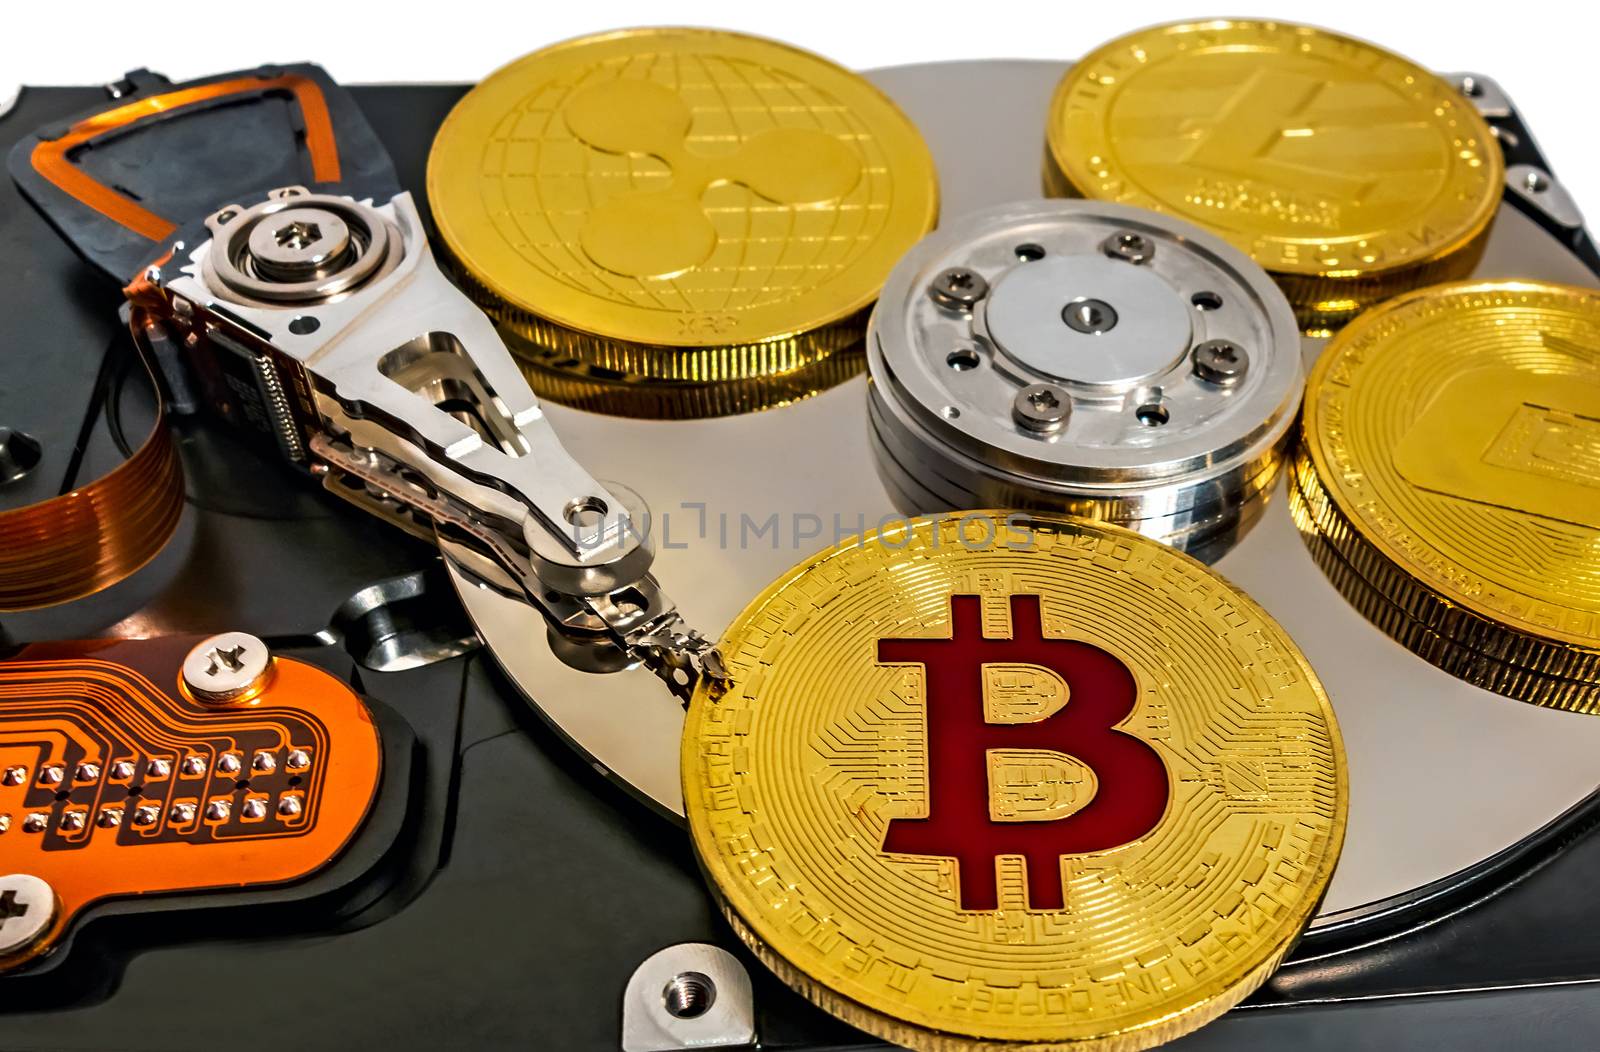 Physical Coin Cryptocurrency BTC Gold Plated Bitcoin in laptop hard disk server. Crypto currency blockchain Coin virtual money concept isolated on white background.